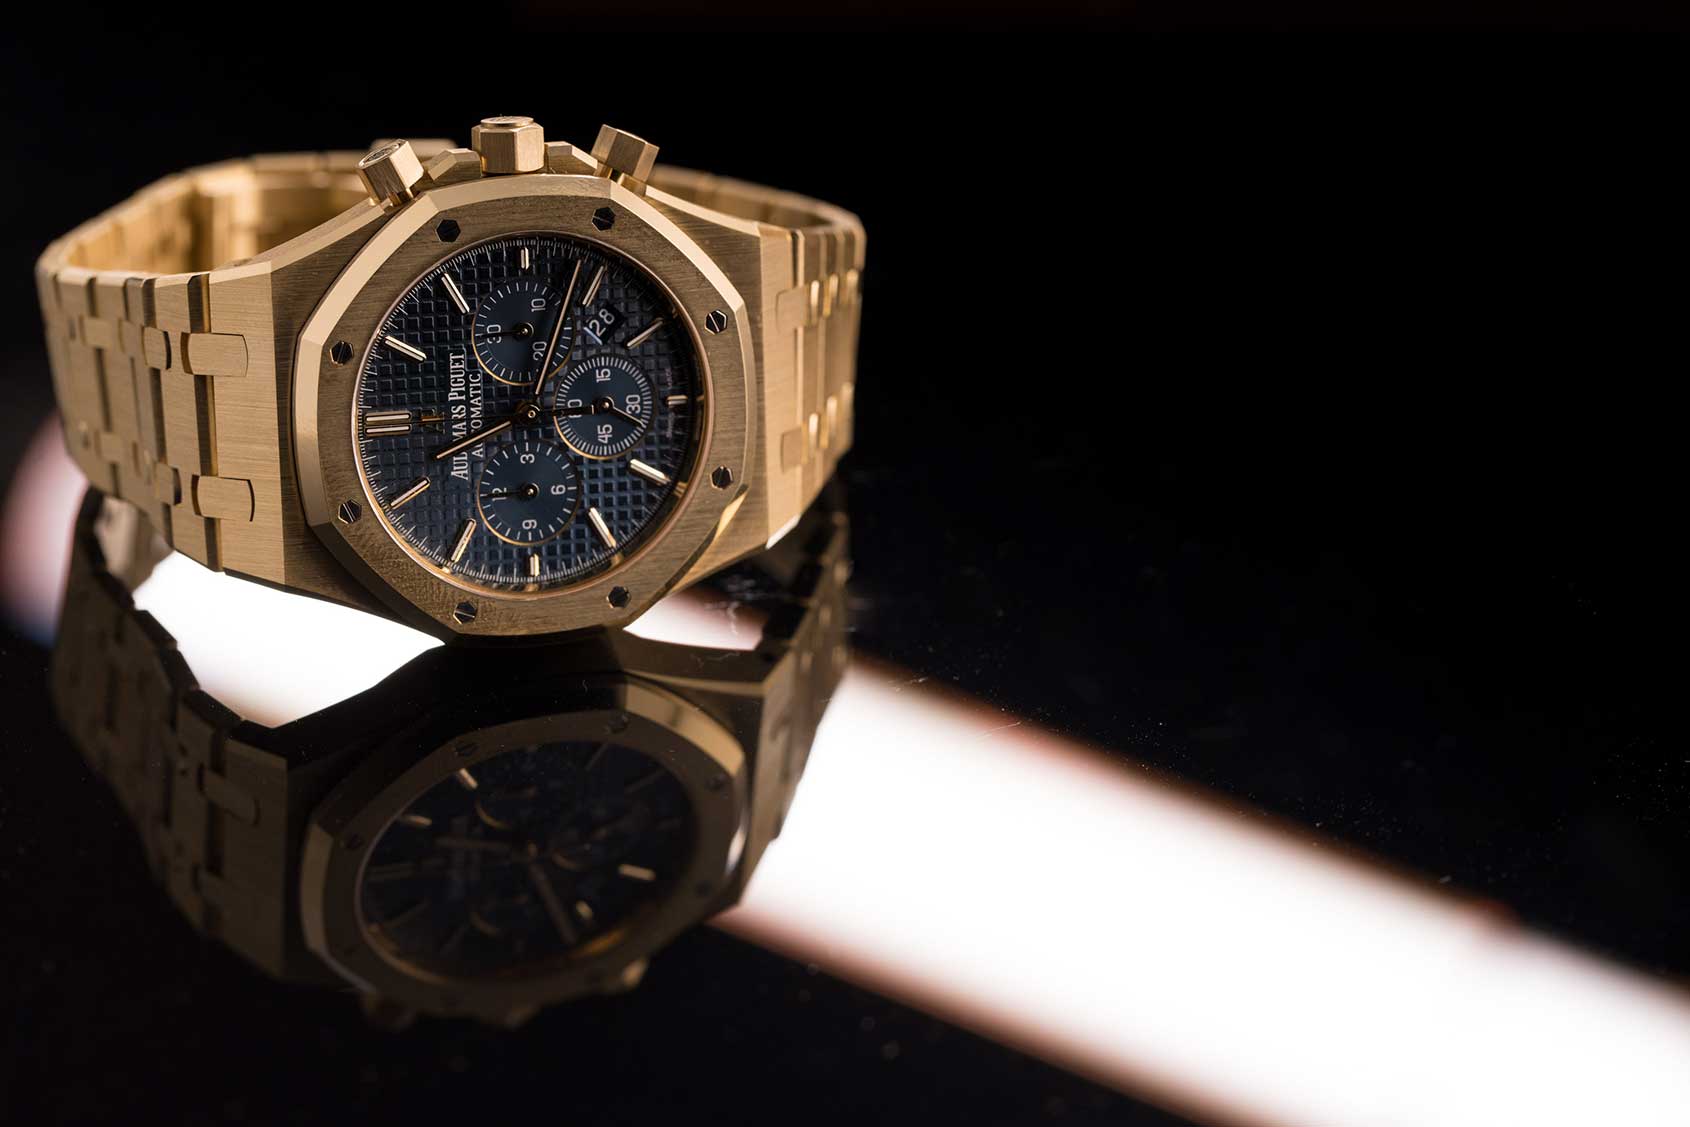 HANDS-ON: The Audemars Piguet Royal Oak Chronograph in yellow gold ...